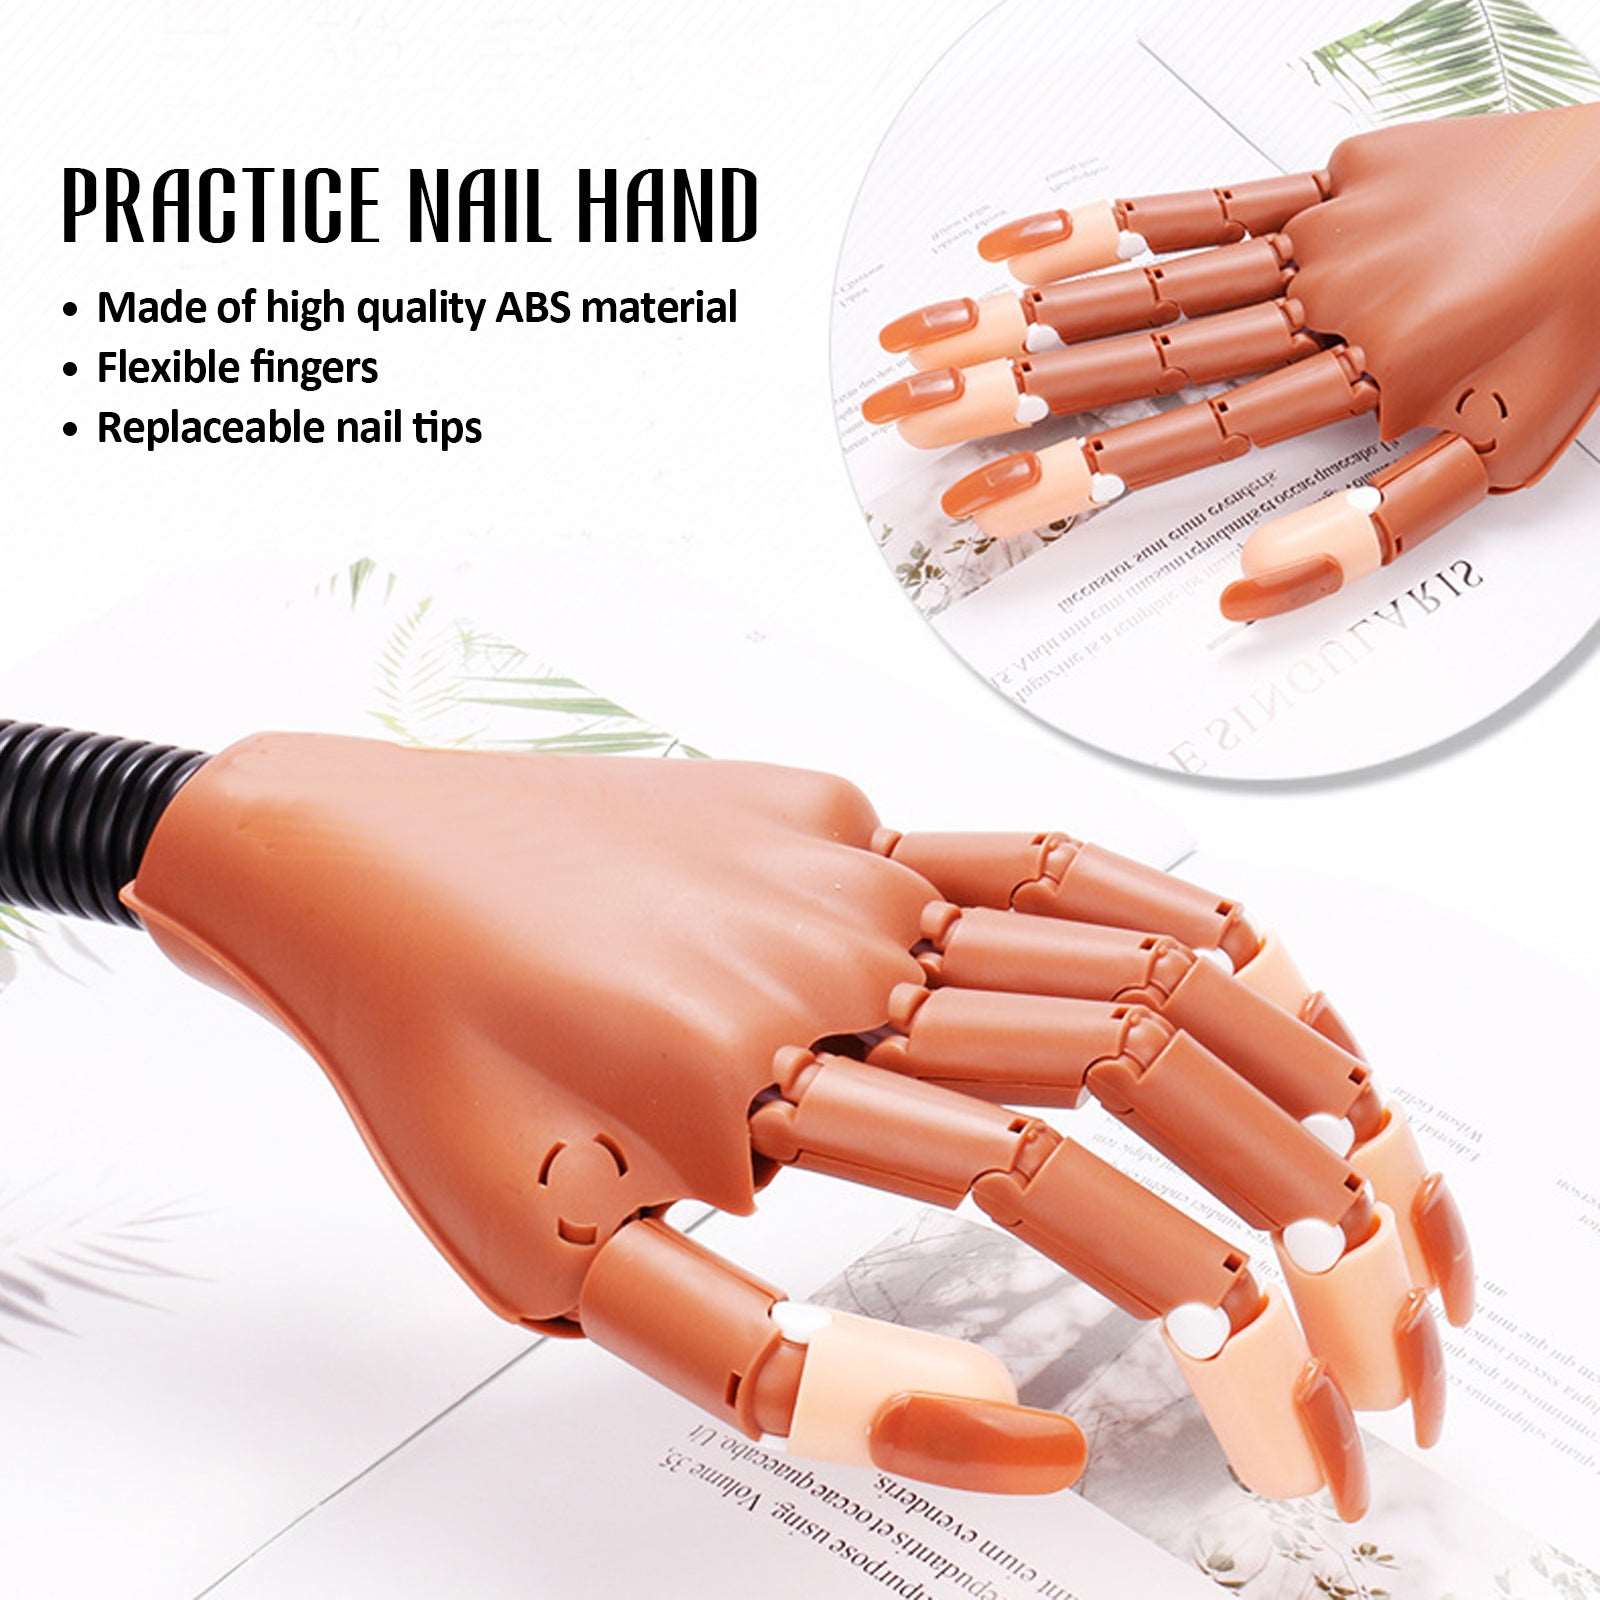 Nail Practice Training Hand Flexible Fake Hand With 100pcs Fake